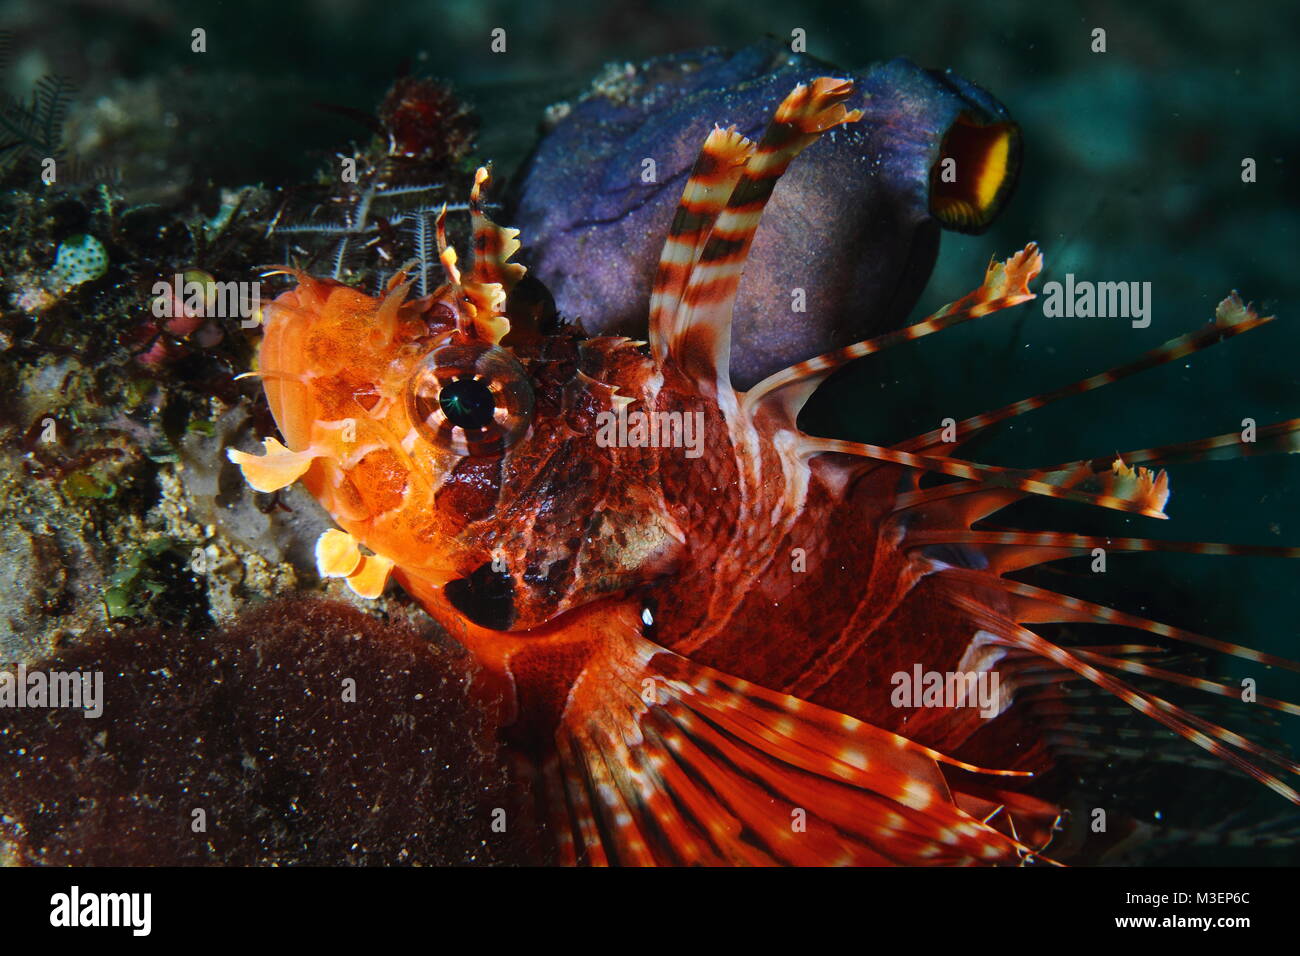 Red Lionfish, Pazifischer Rotfeuerfisch, Pterios volitans, Padang Bai, Bali, Indonesia Stock Photo